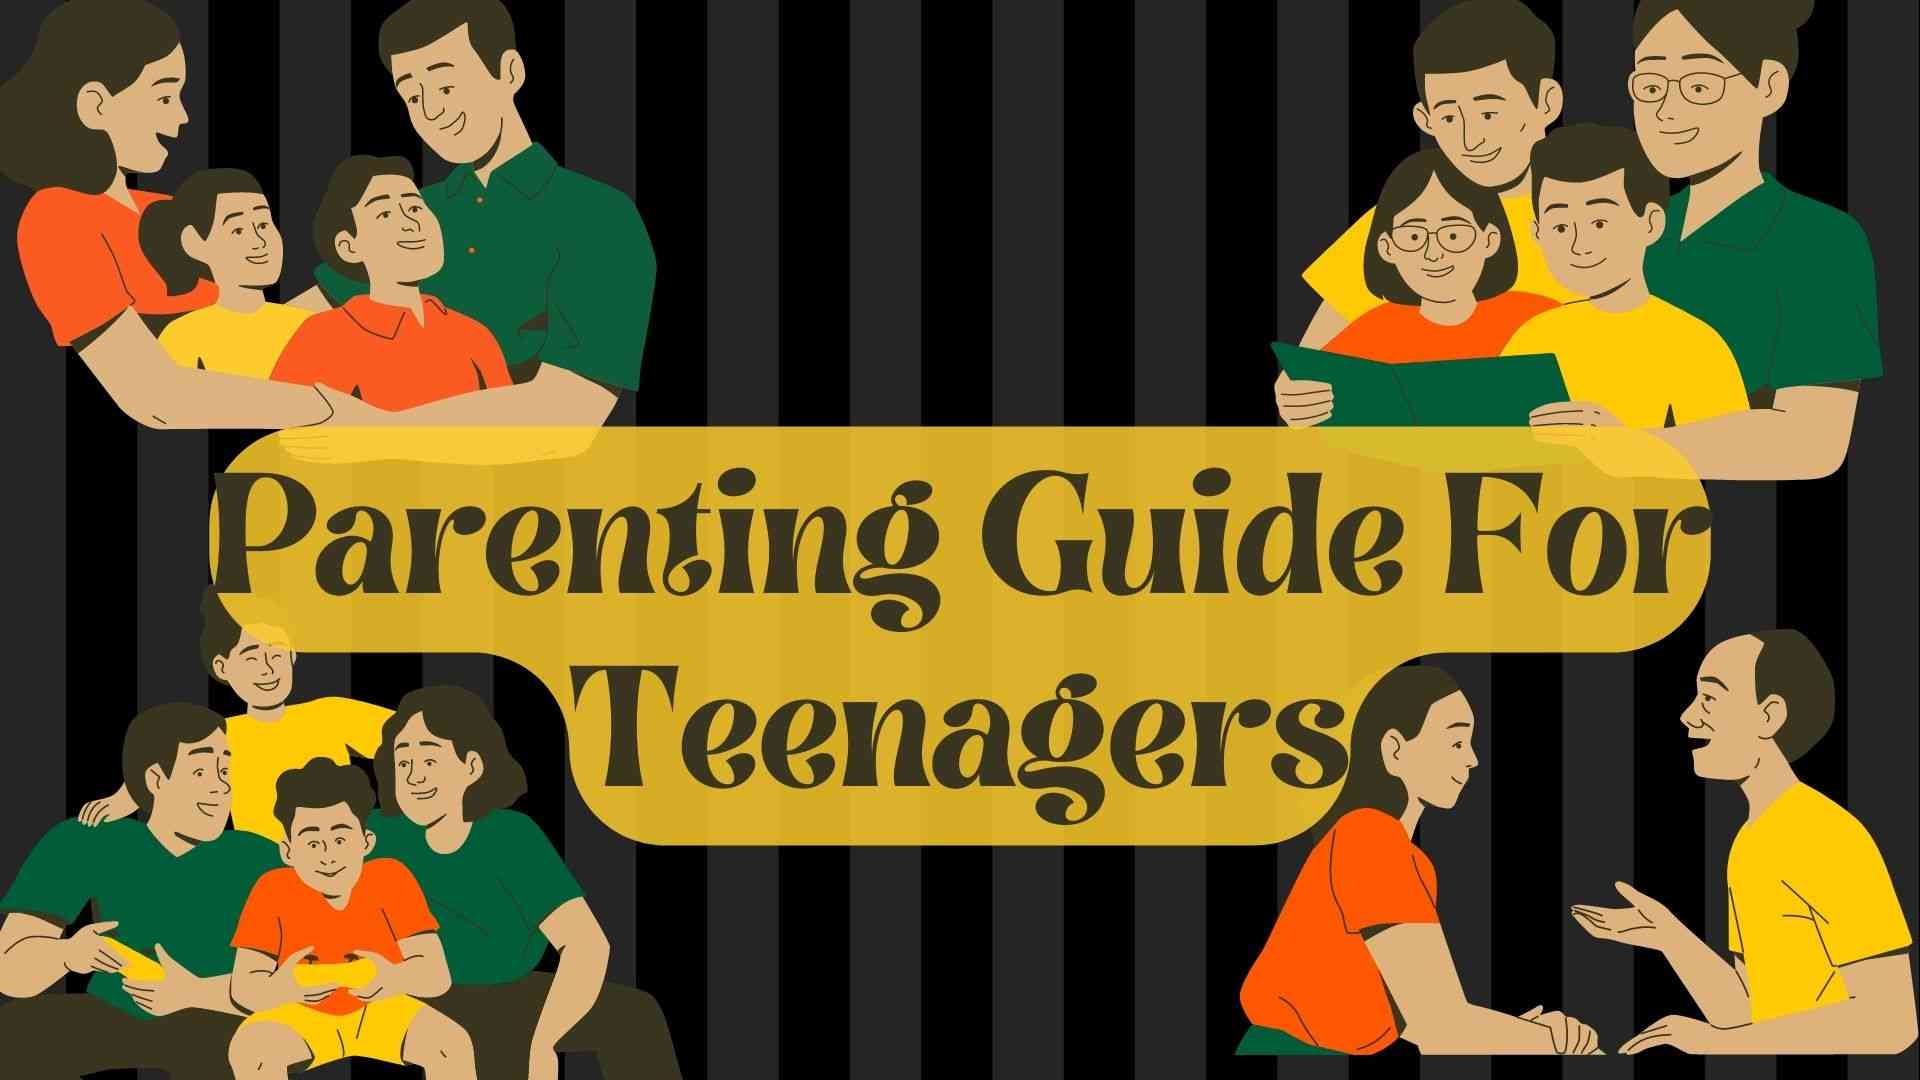 Parenting Guide For Teenagers wallpaper and images